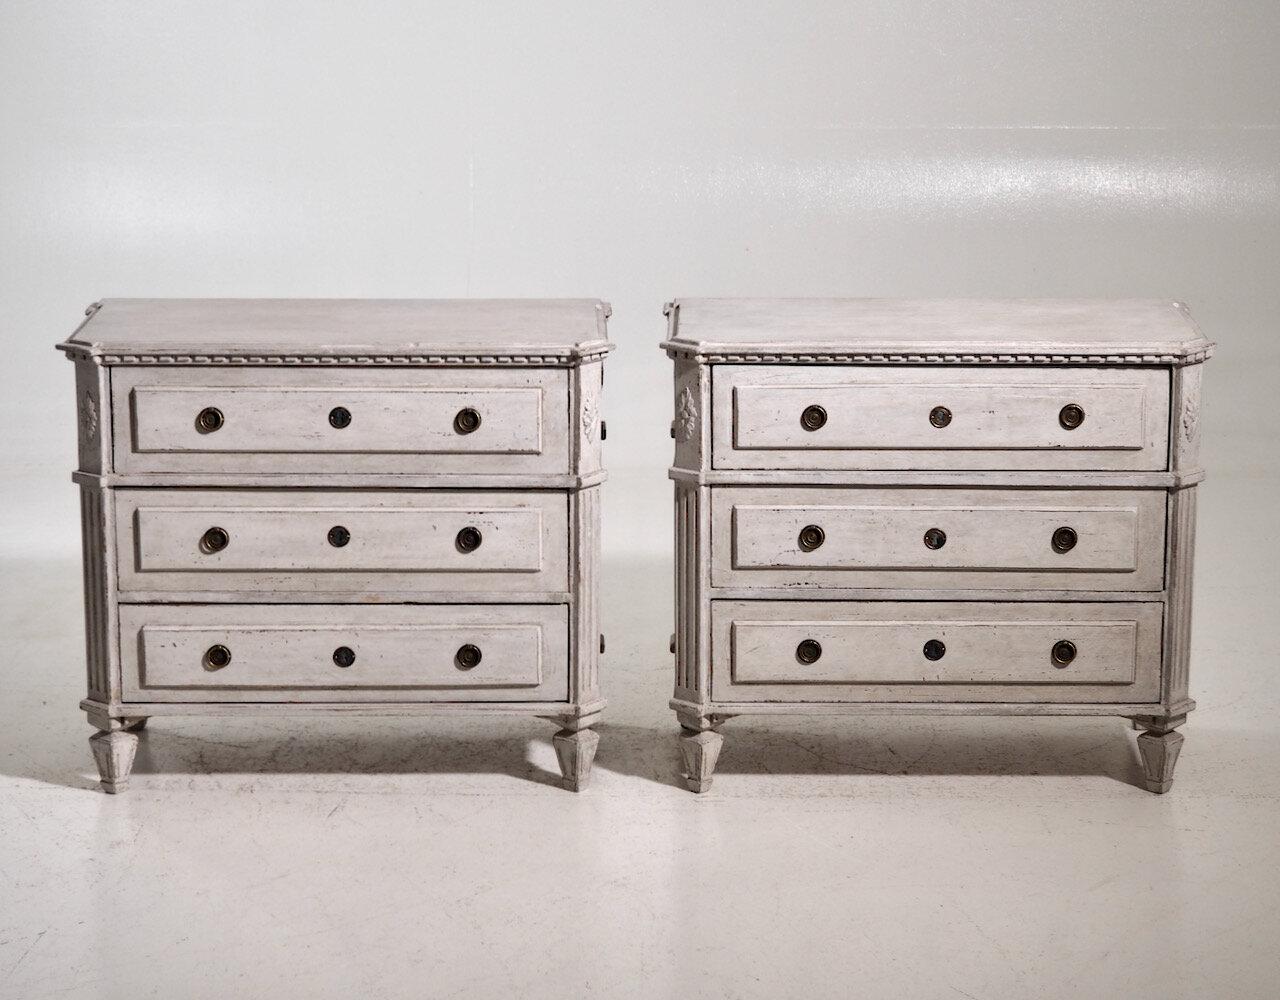 A special, neoclassical pair of Swedish Gustavian style painted chests with a soft gray patina. Each chest has dentil modeling around the top and three raised panel drawers with tapered legs. The corner posts are canted and fluted with carved